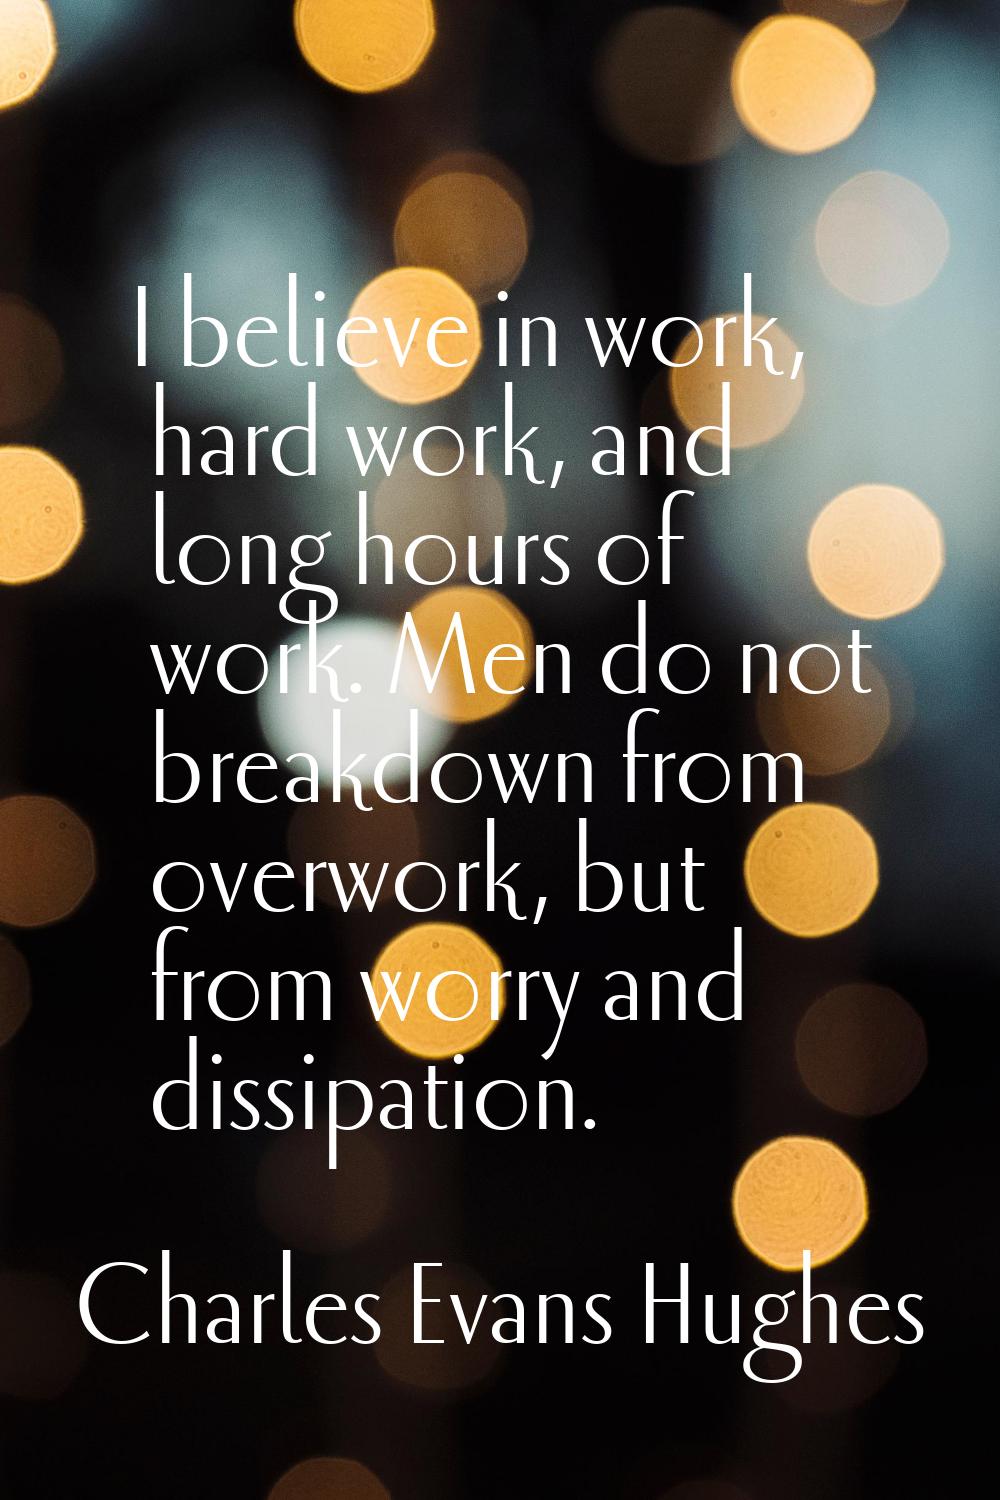 I believe in work, hard work, and long hours of work. Men do not breakdown from overwork, but from 